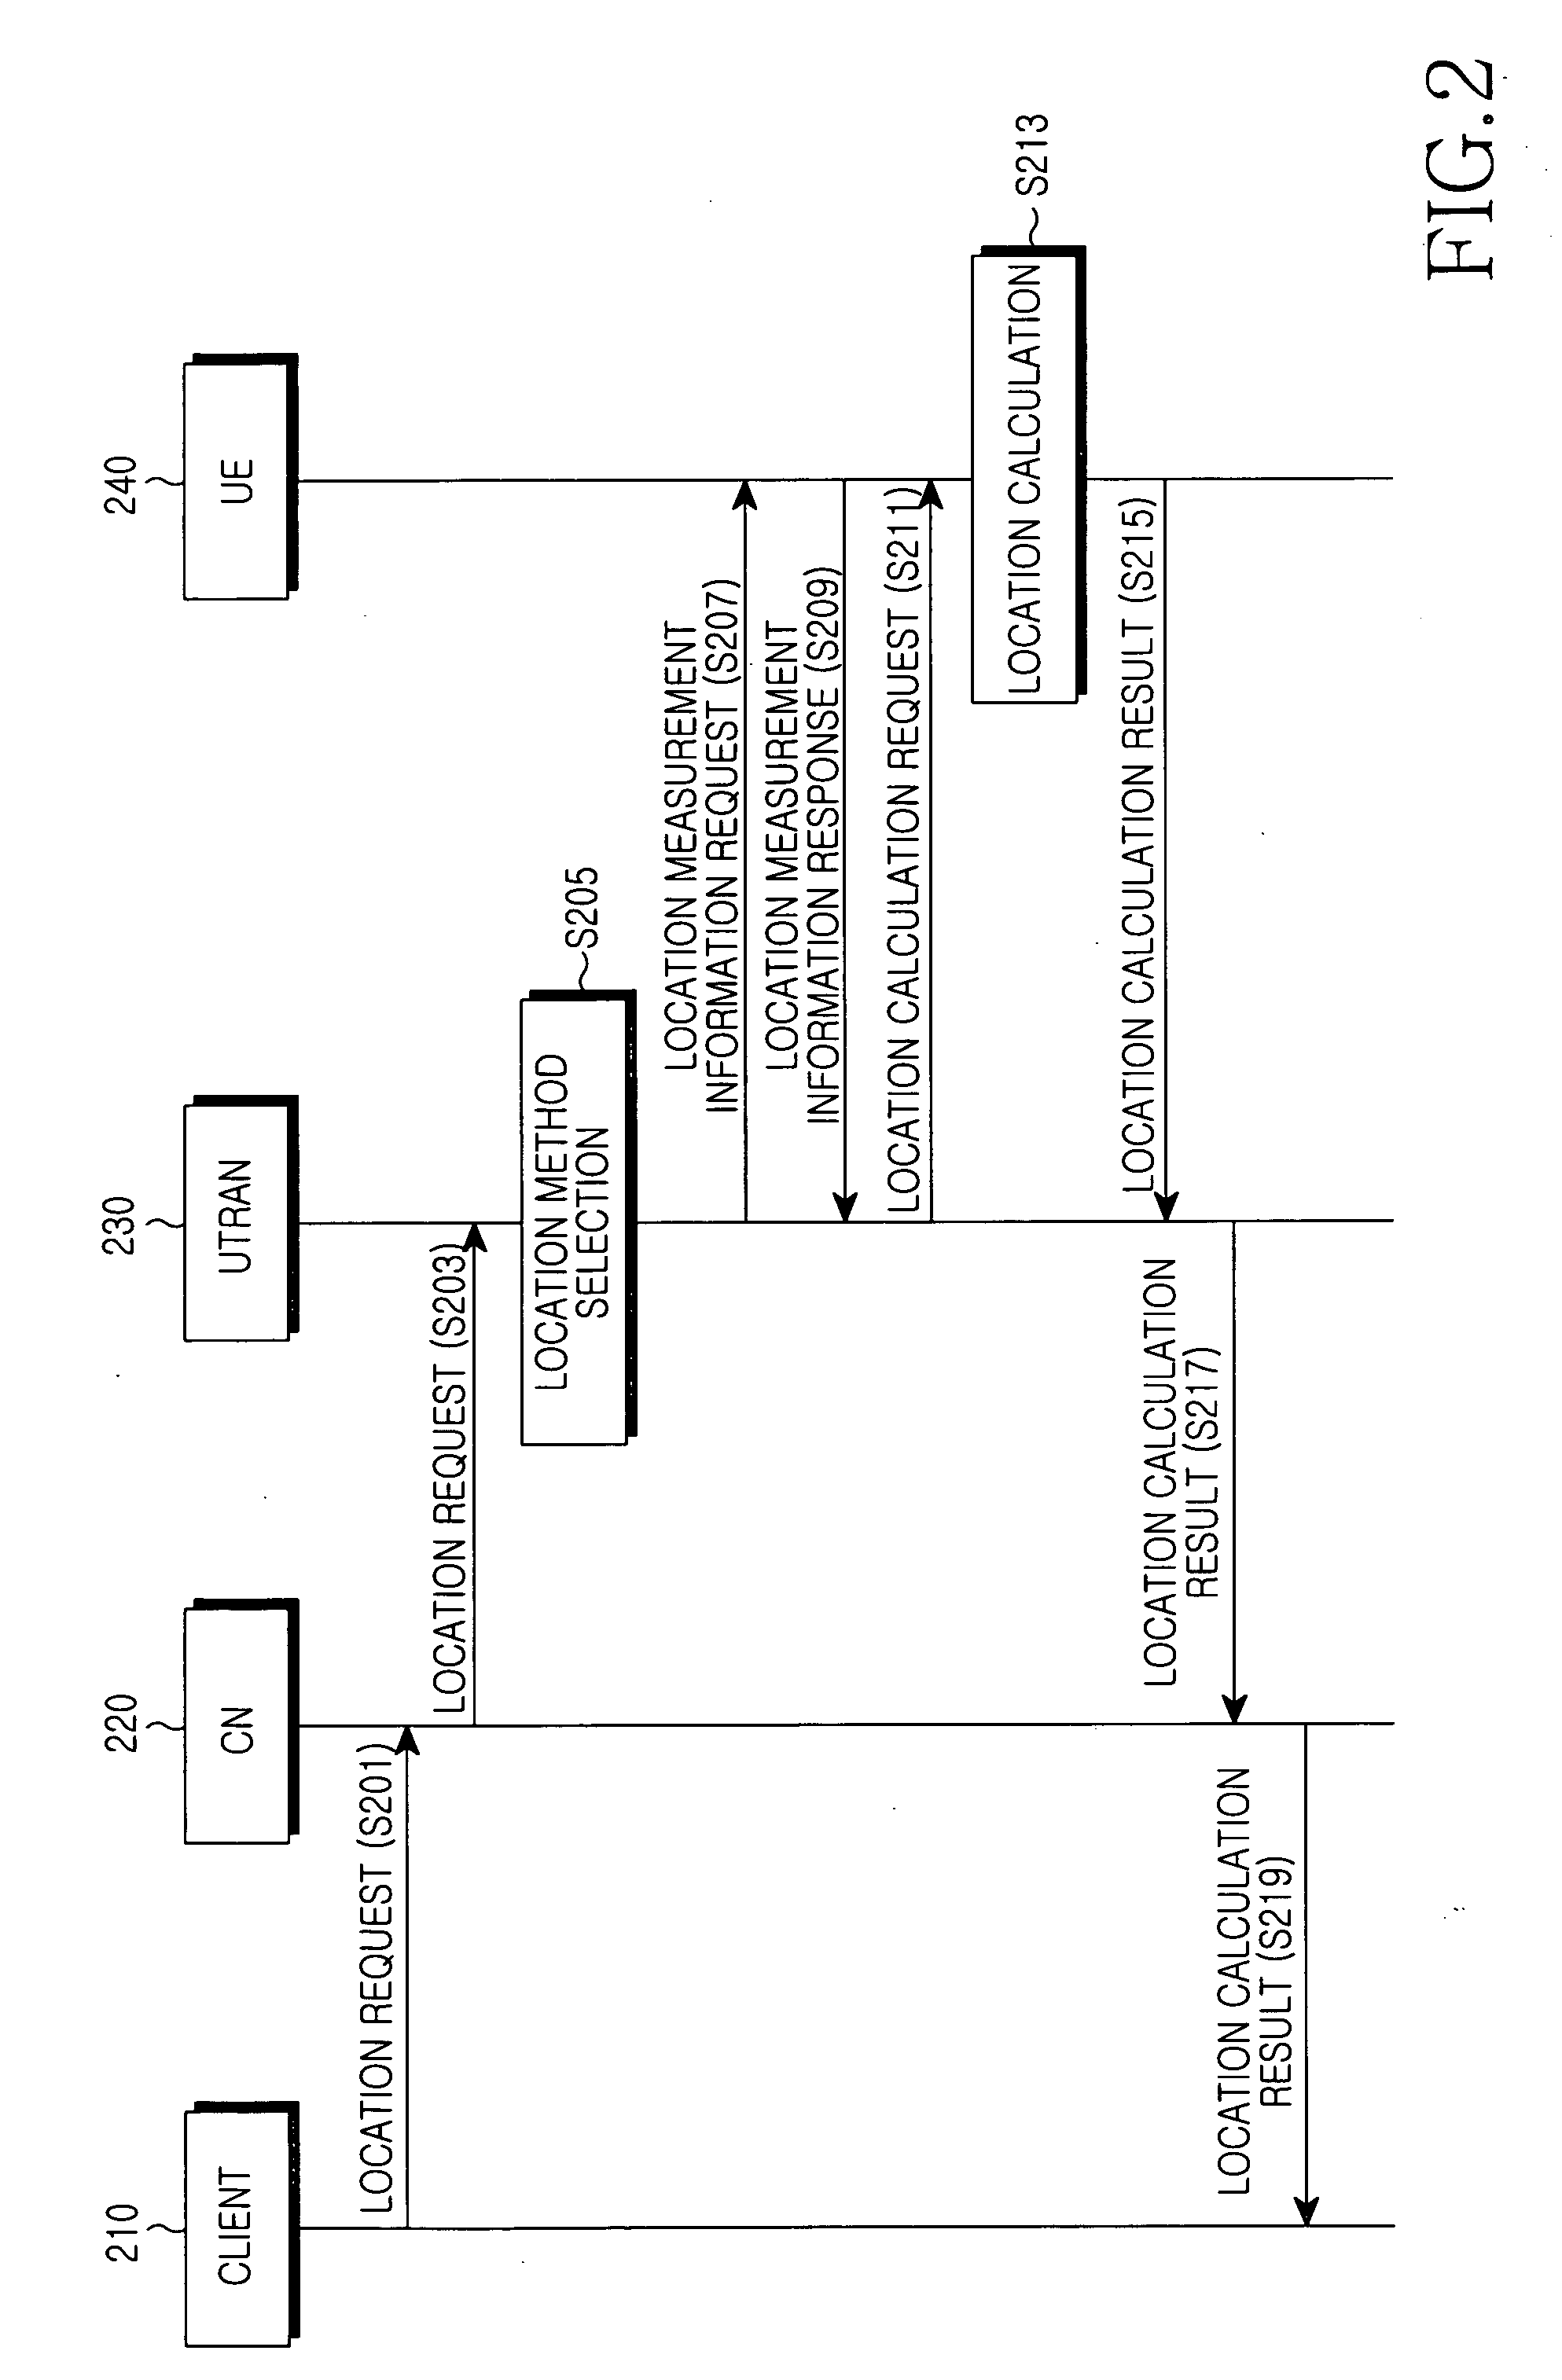 Apparatus and method for locating mobile terminals